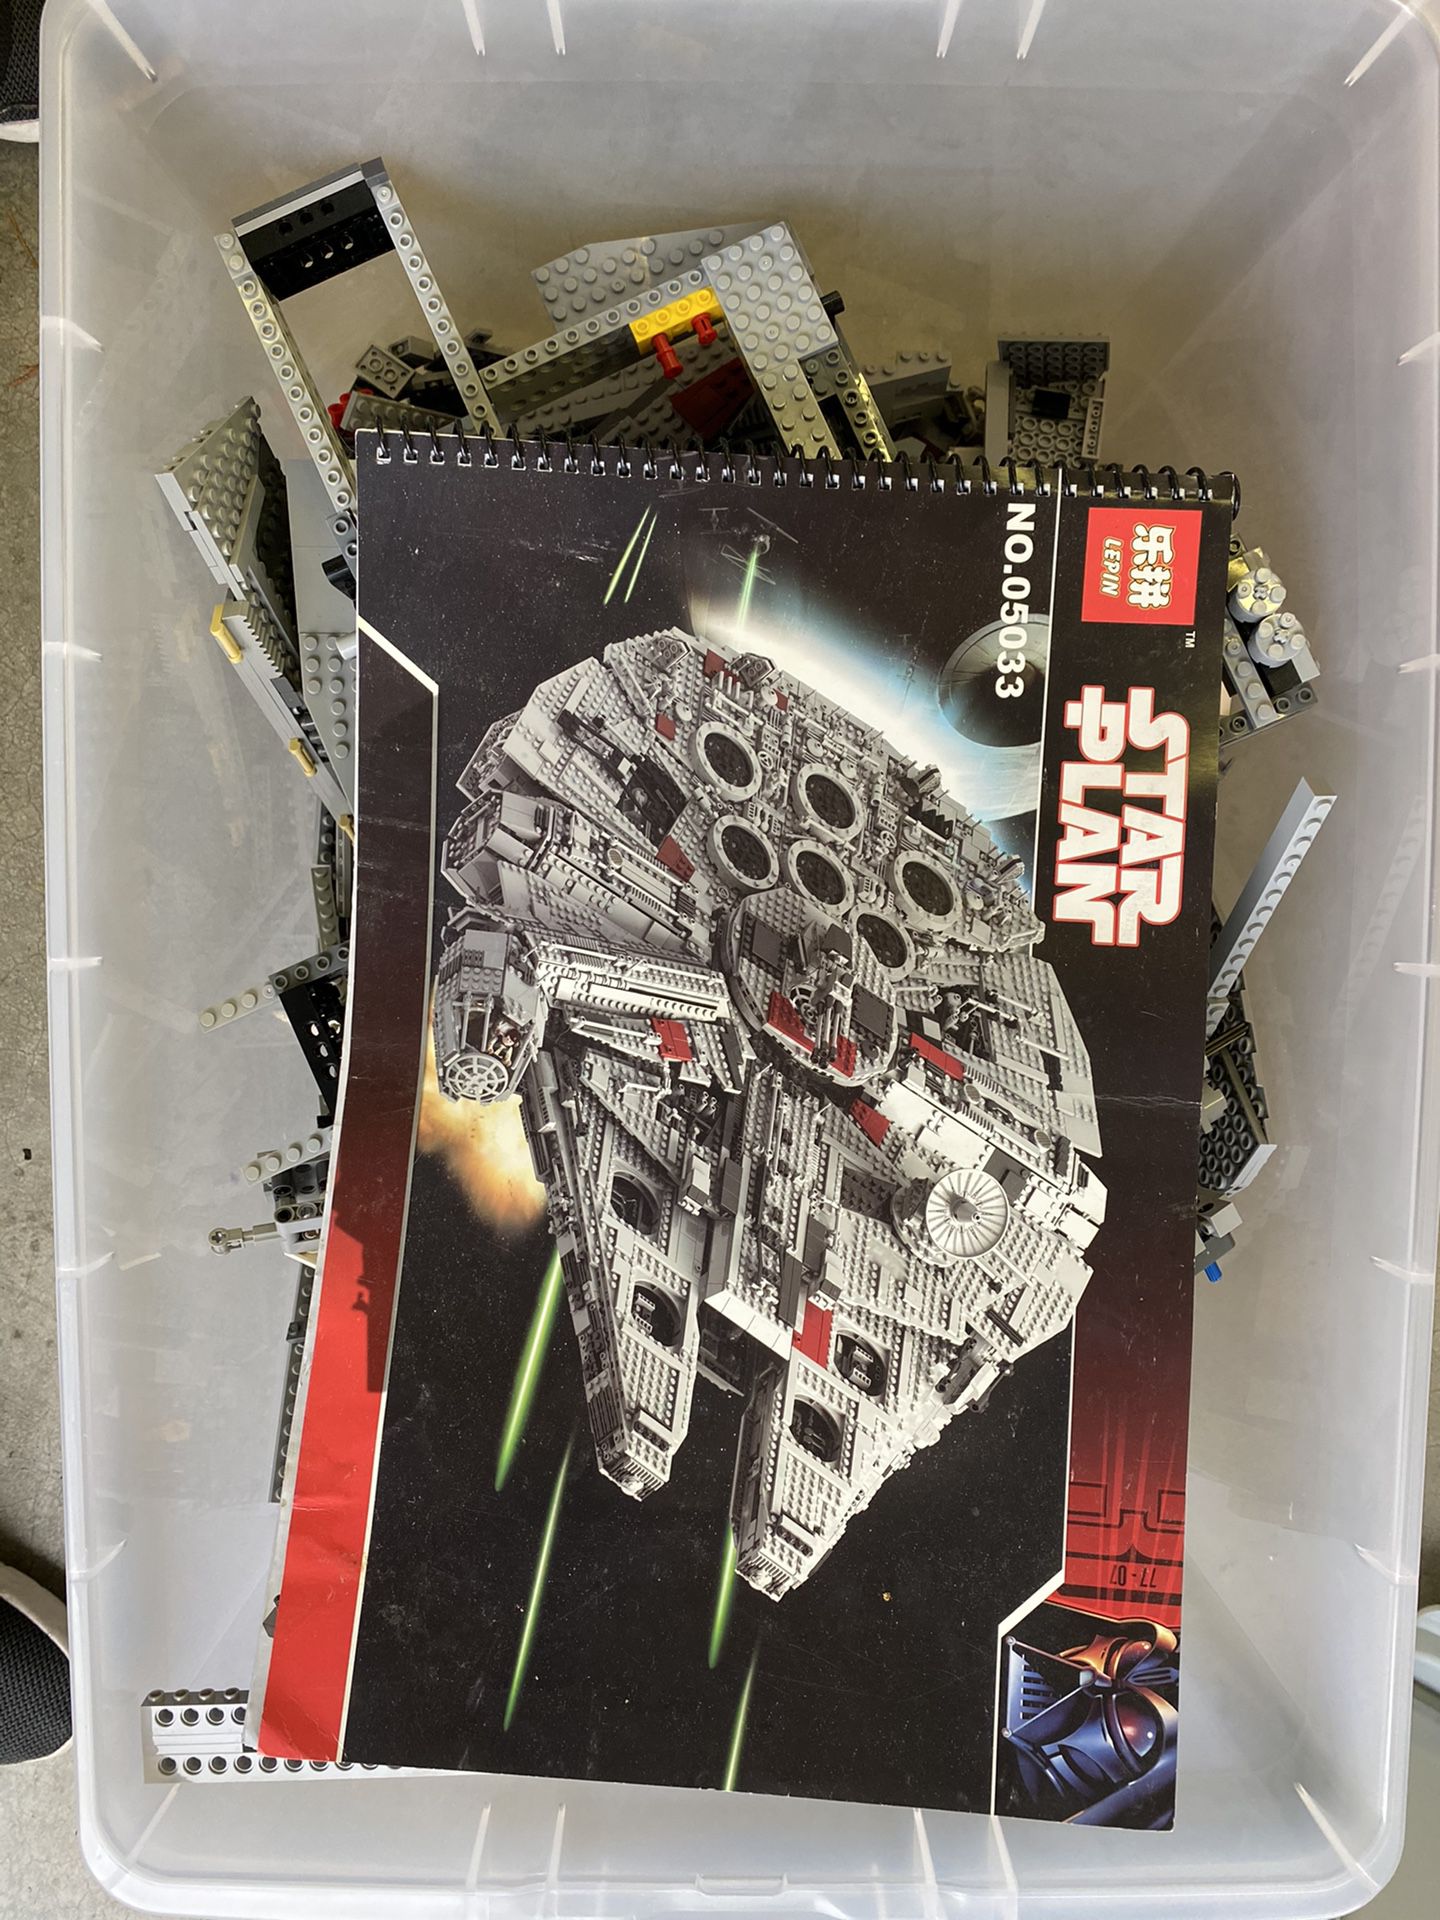 Millennium Falcon LEGO set. All pieces there